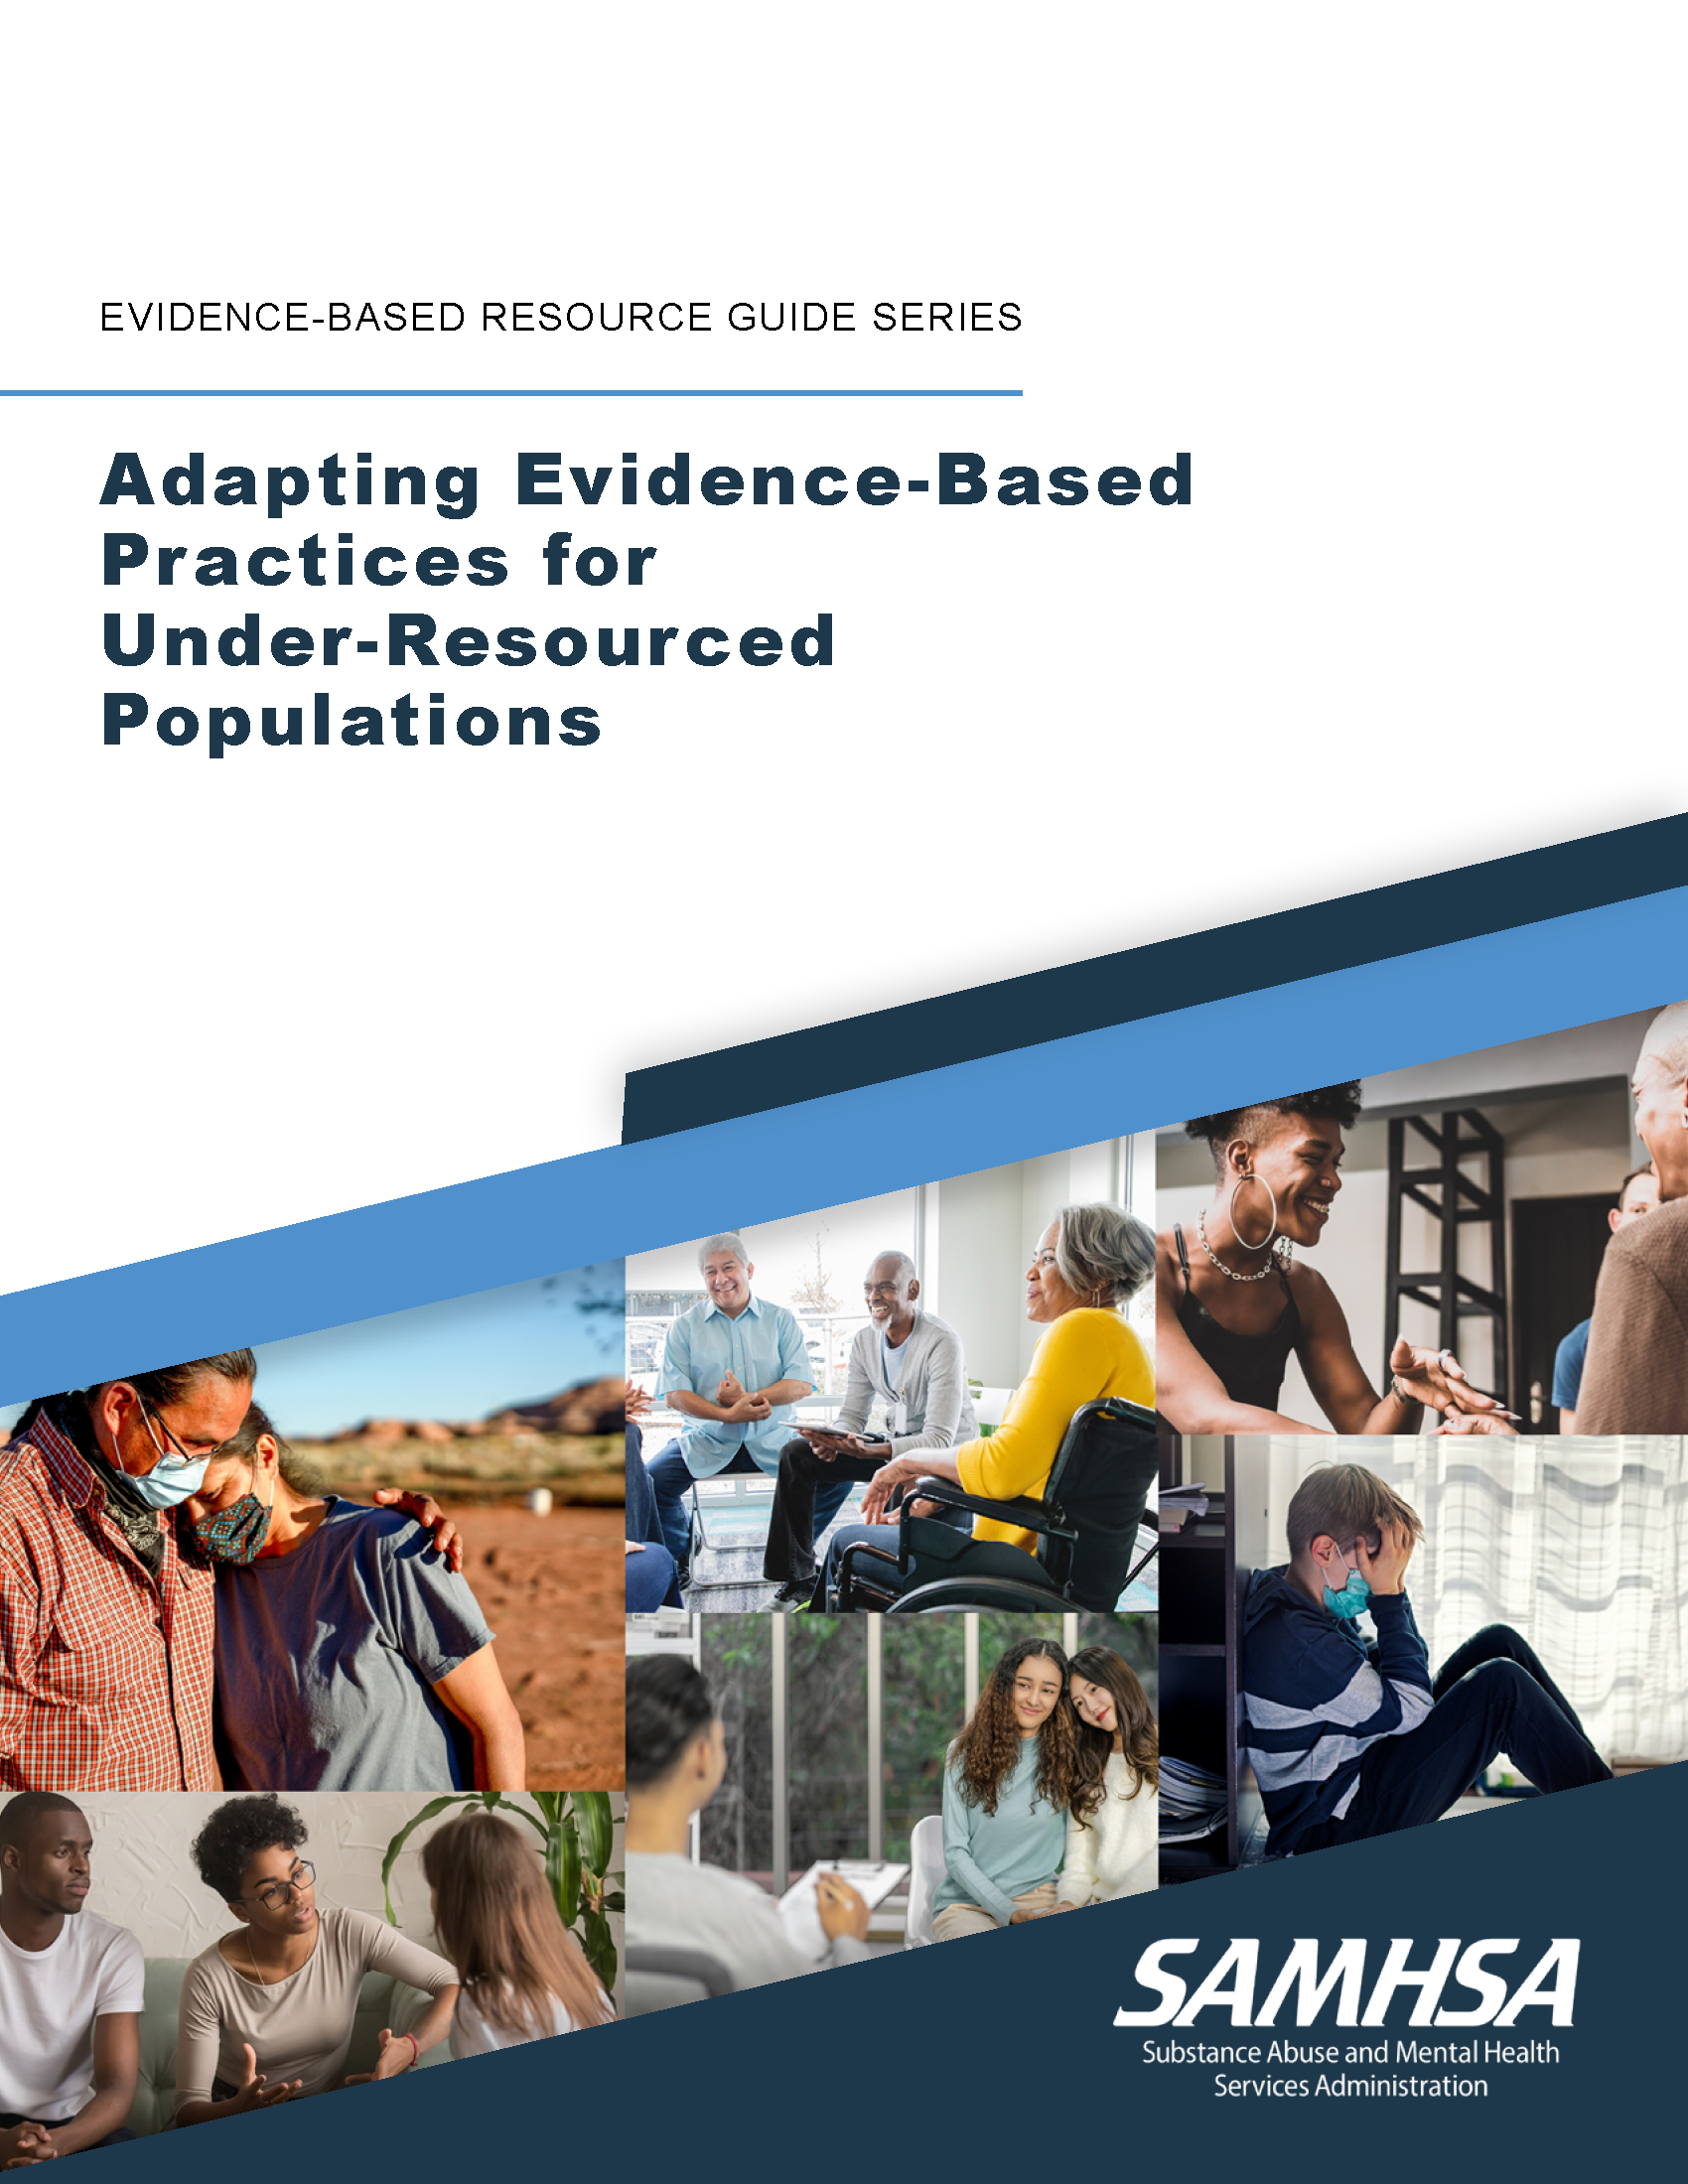 SAMHSA Guide: Adapting Evidence-based Practices for Under-resourced Populations